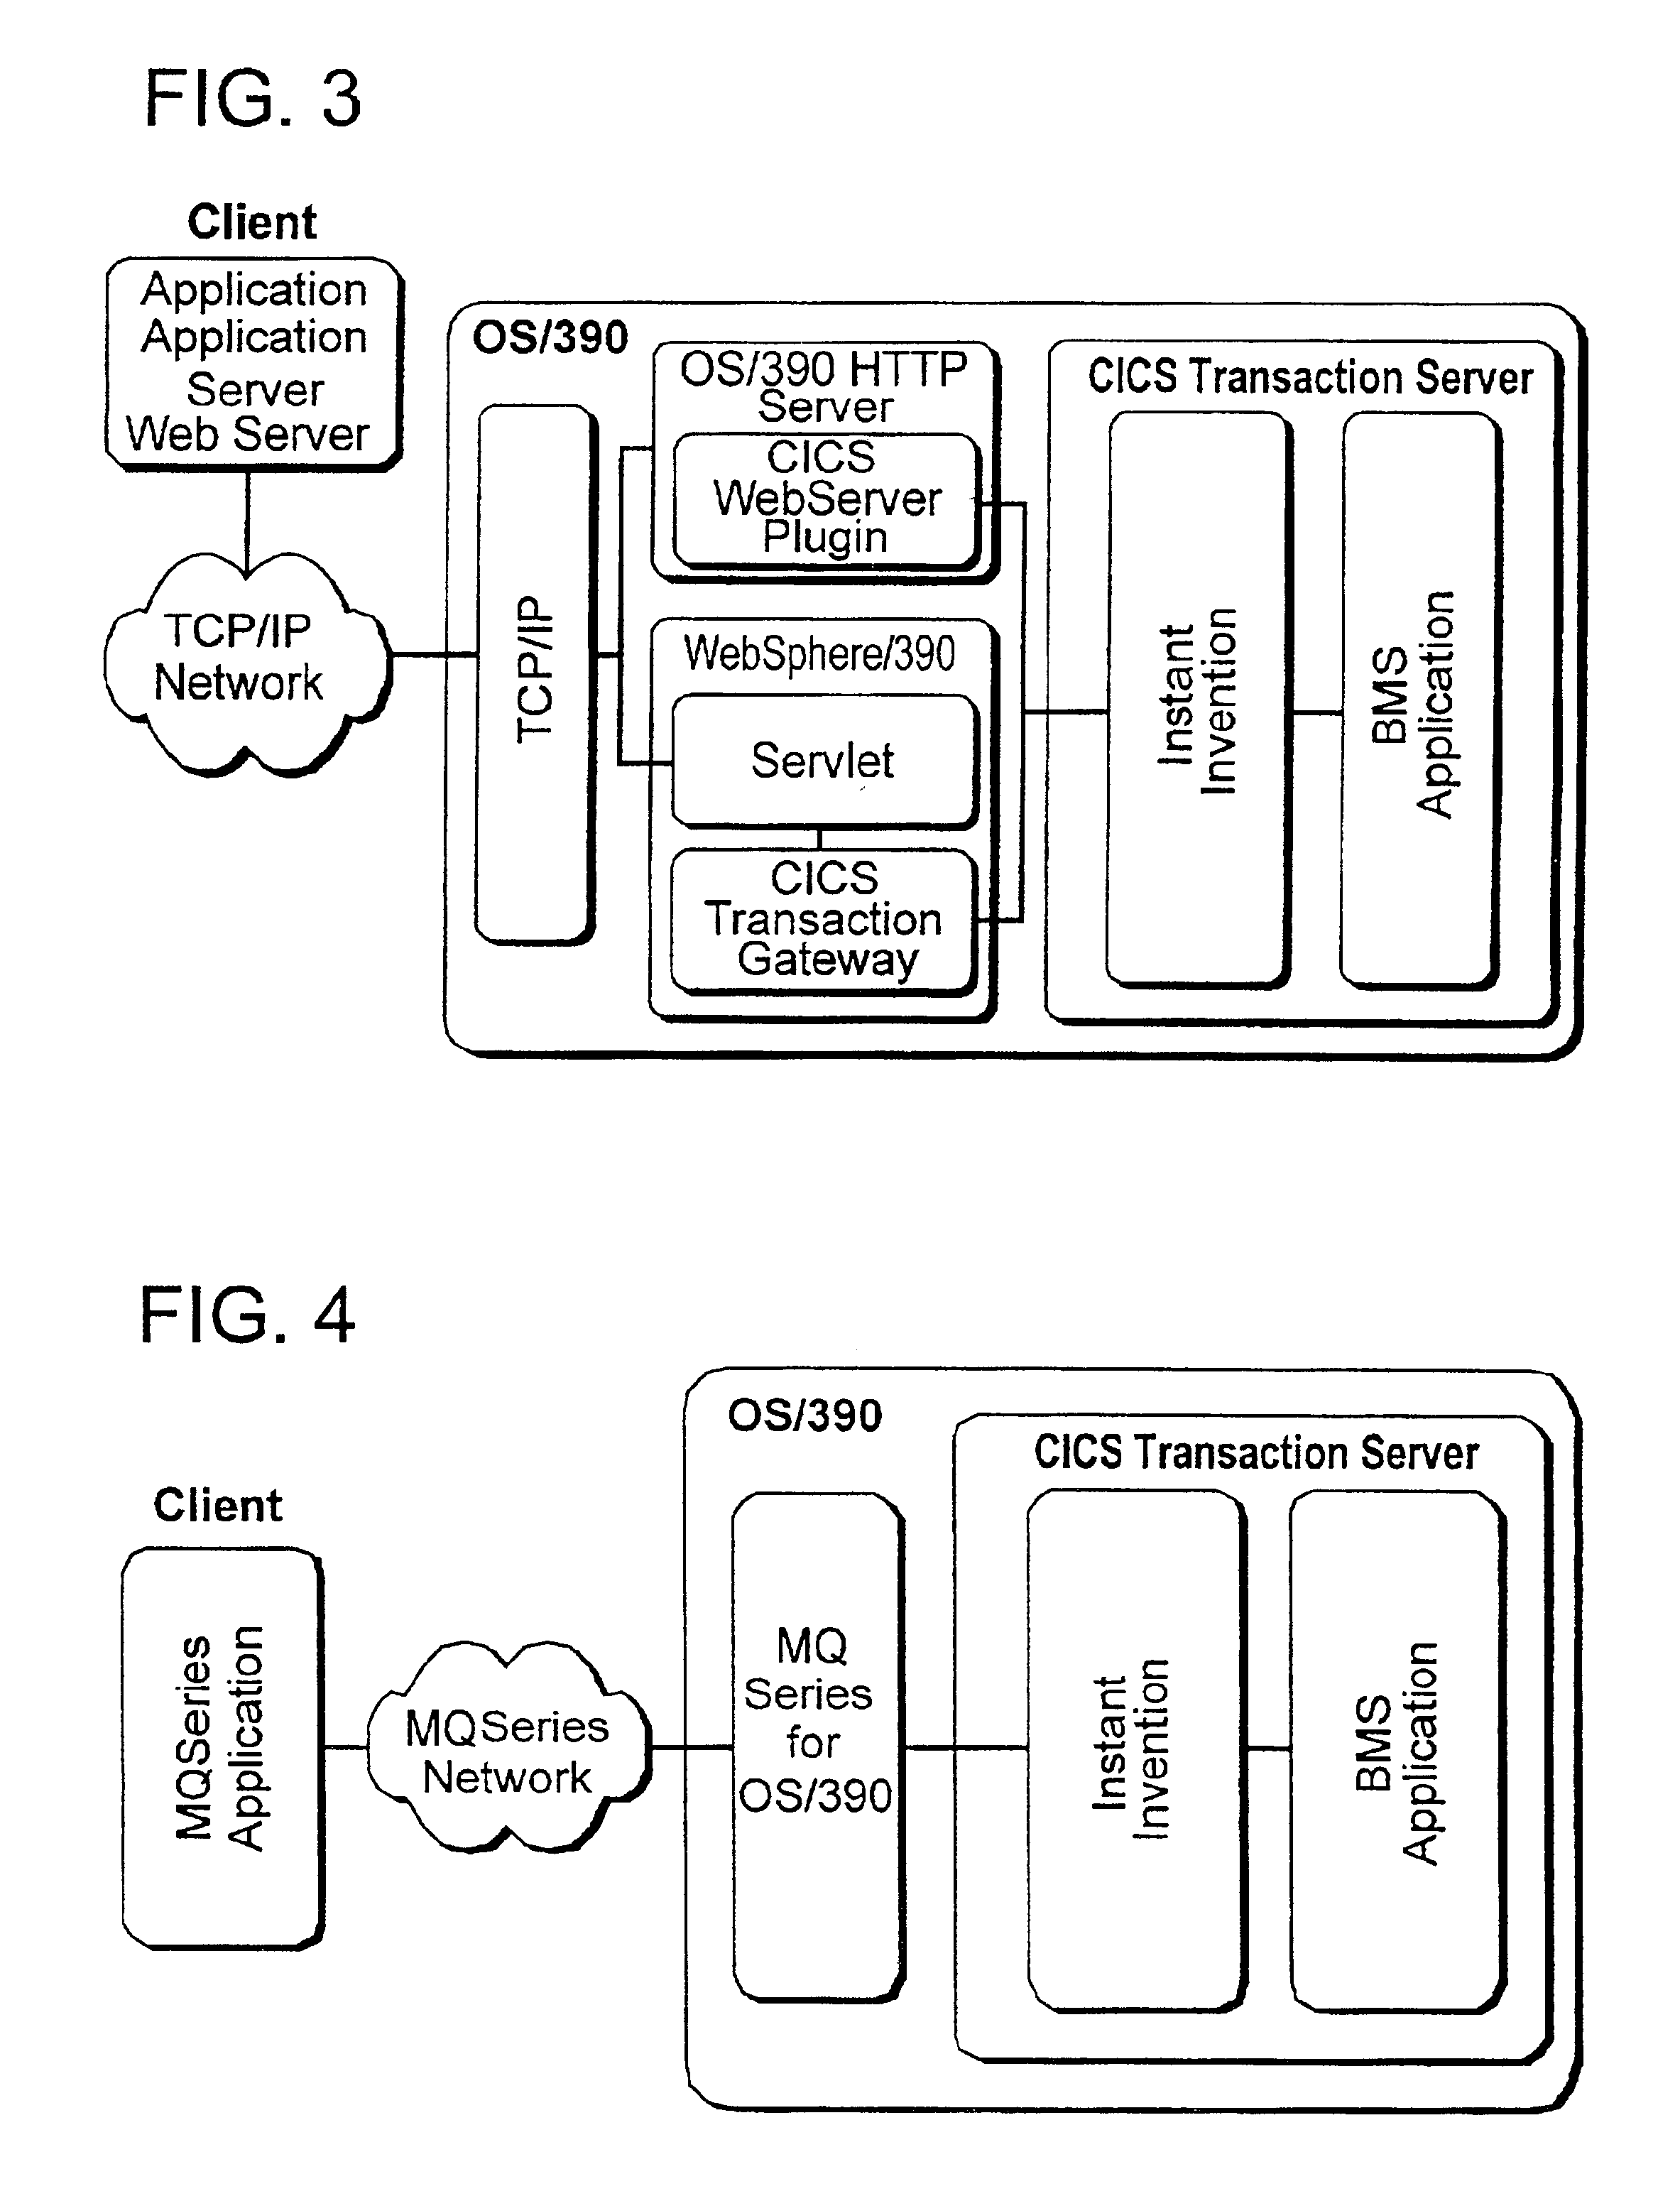 System, method and apparatus to allow communication between CICS and non-CICS software applications